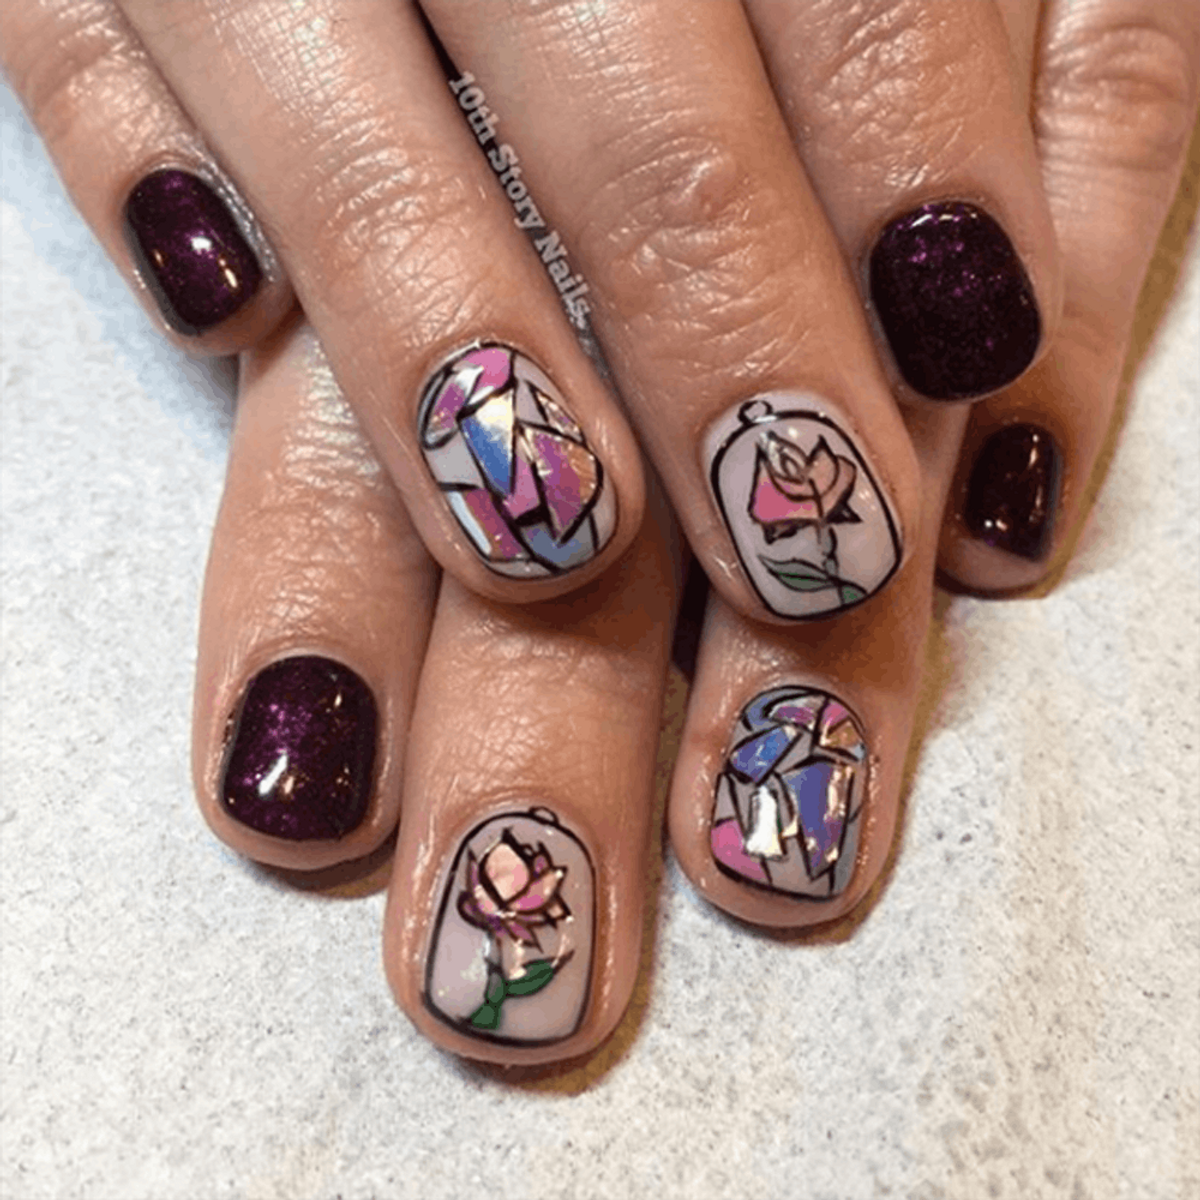 7 Beauty and the Beast Nail Art Designs to Rock for Opening Night